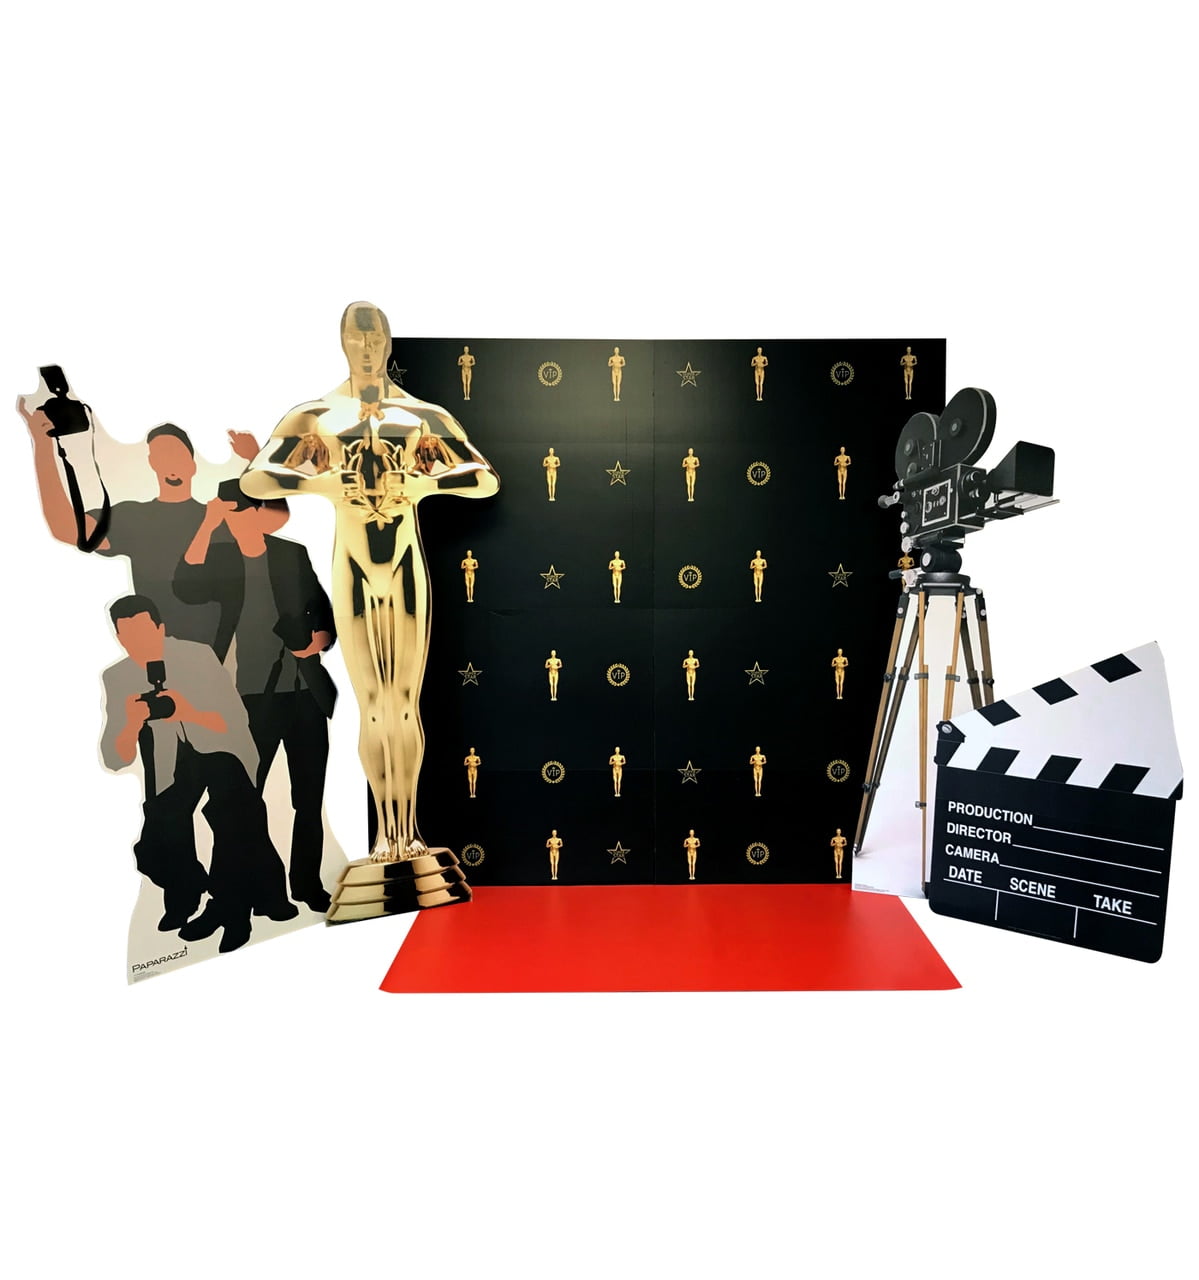 Picture of Advanced Graphics 2648 84 x 88 in. Hollywood Red Carpet Scene